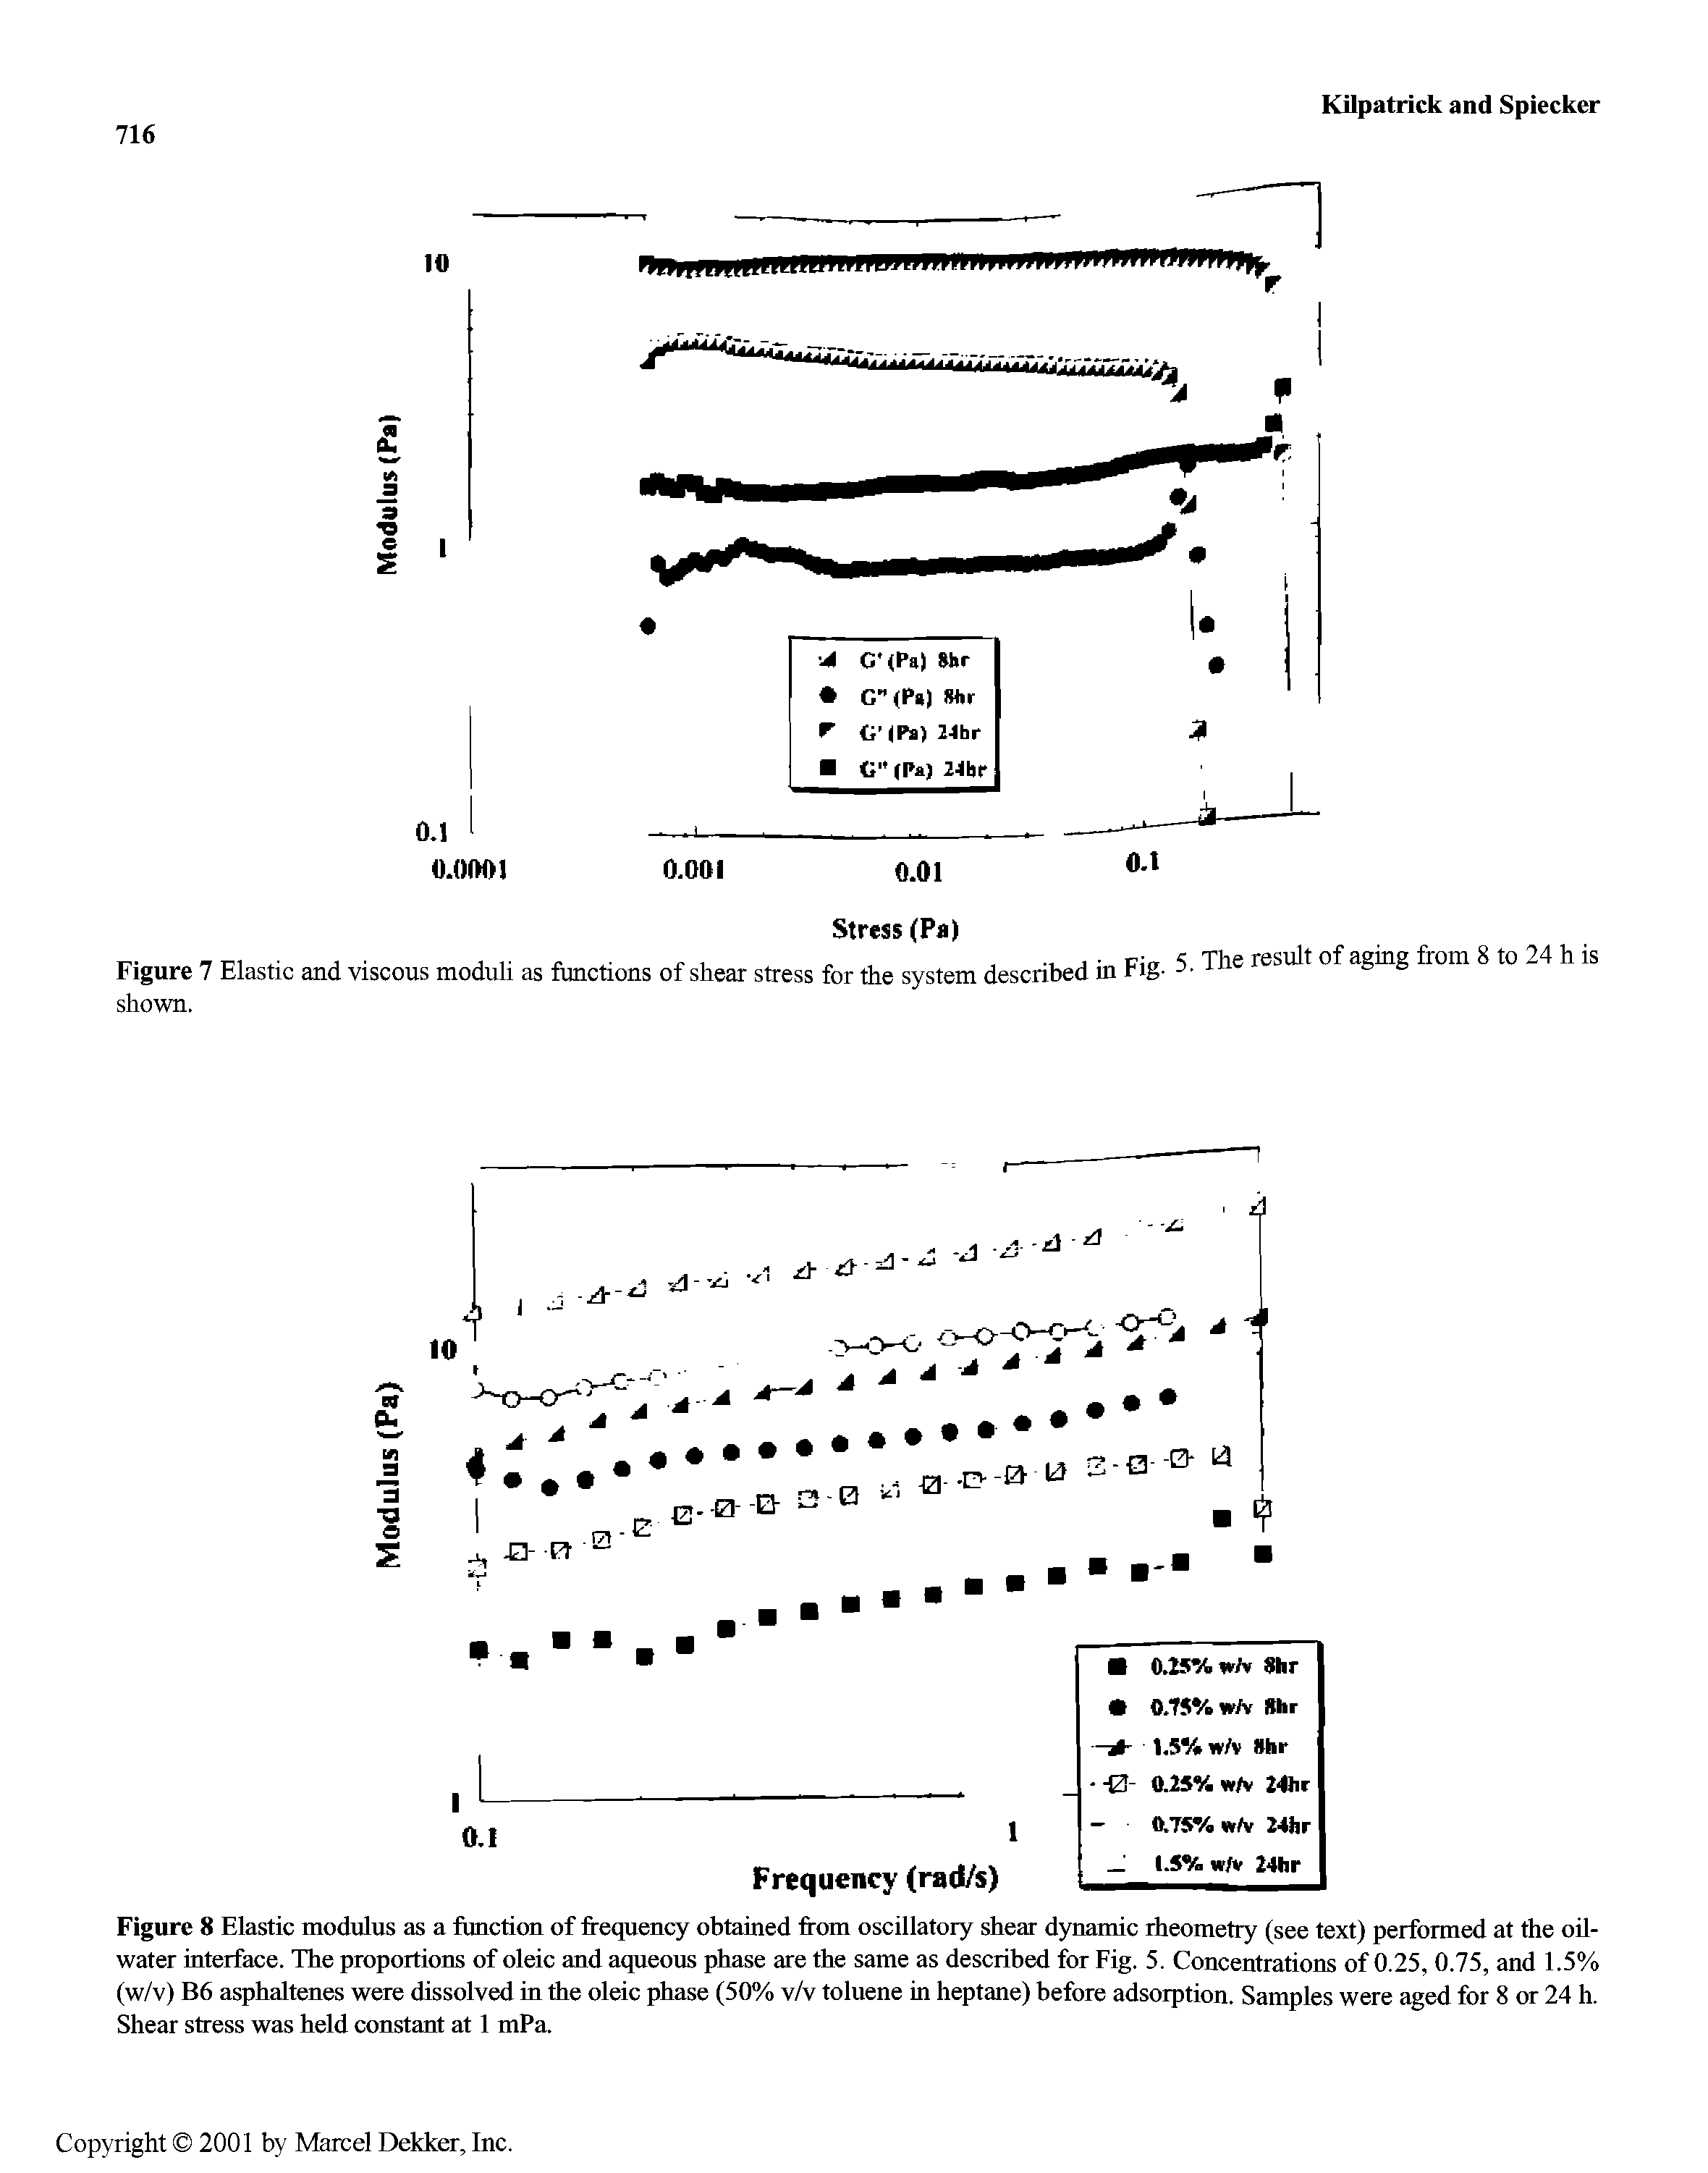 Figure 8 Elastic modulus as a function of frequency obtained from oscillatory shear dynamic rheometry (see text) performed at the oil-water interface. The proportions of oleic and aqueous phase are the same as described for Fig. 5. Concentrations of 0.25, 0.75, and 1.5% (w/v) B6 asphaltenes were dissolved in the oleic phase (50% yh toluene in heptane) before adsorption. Samples were aged for 8 or 24 h. Shear stress was held constant at 1 mPa.